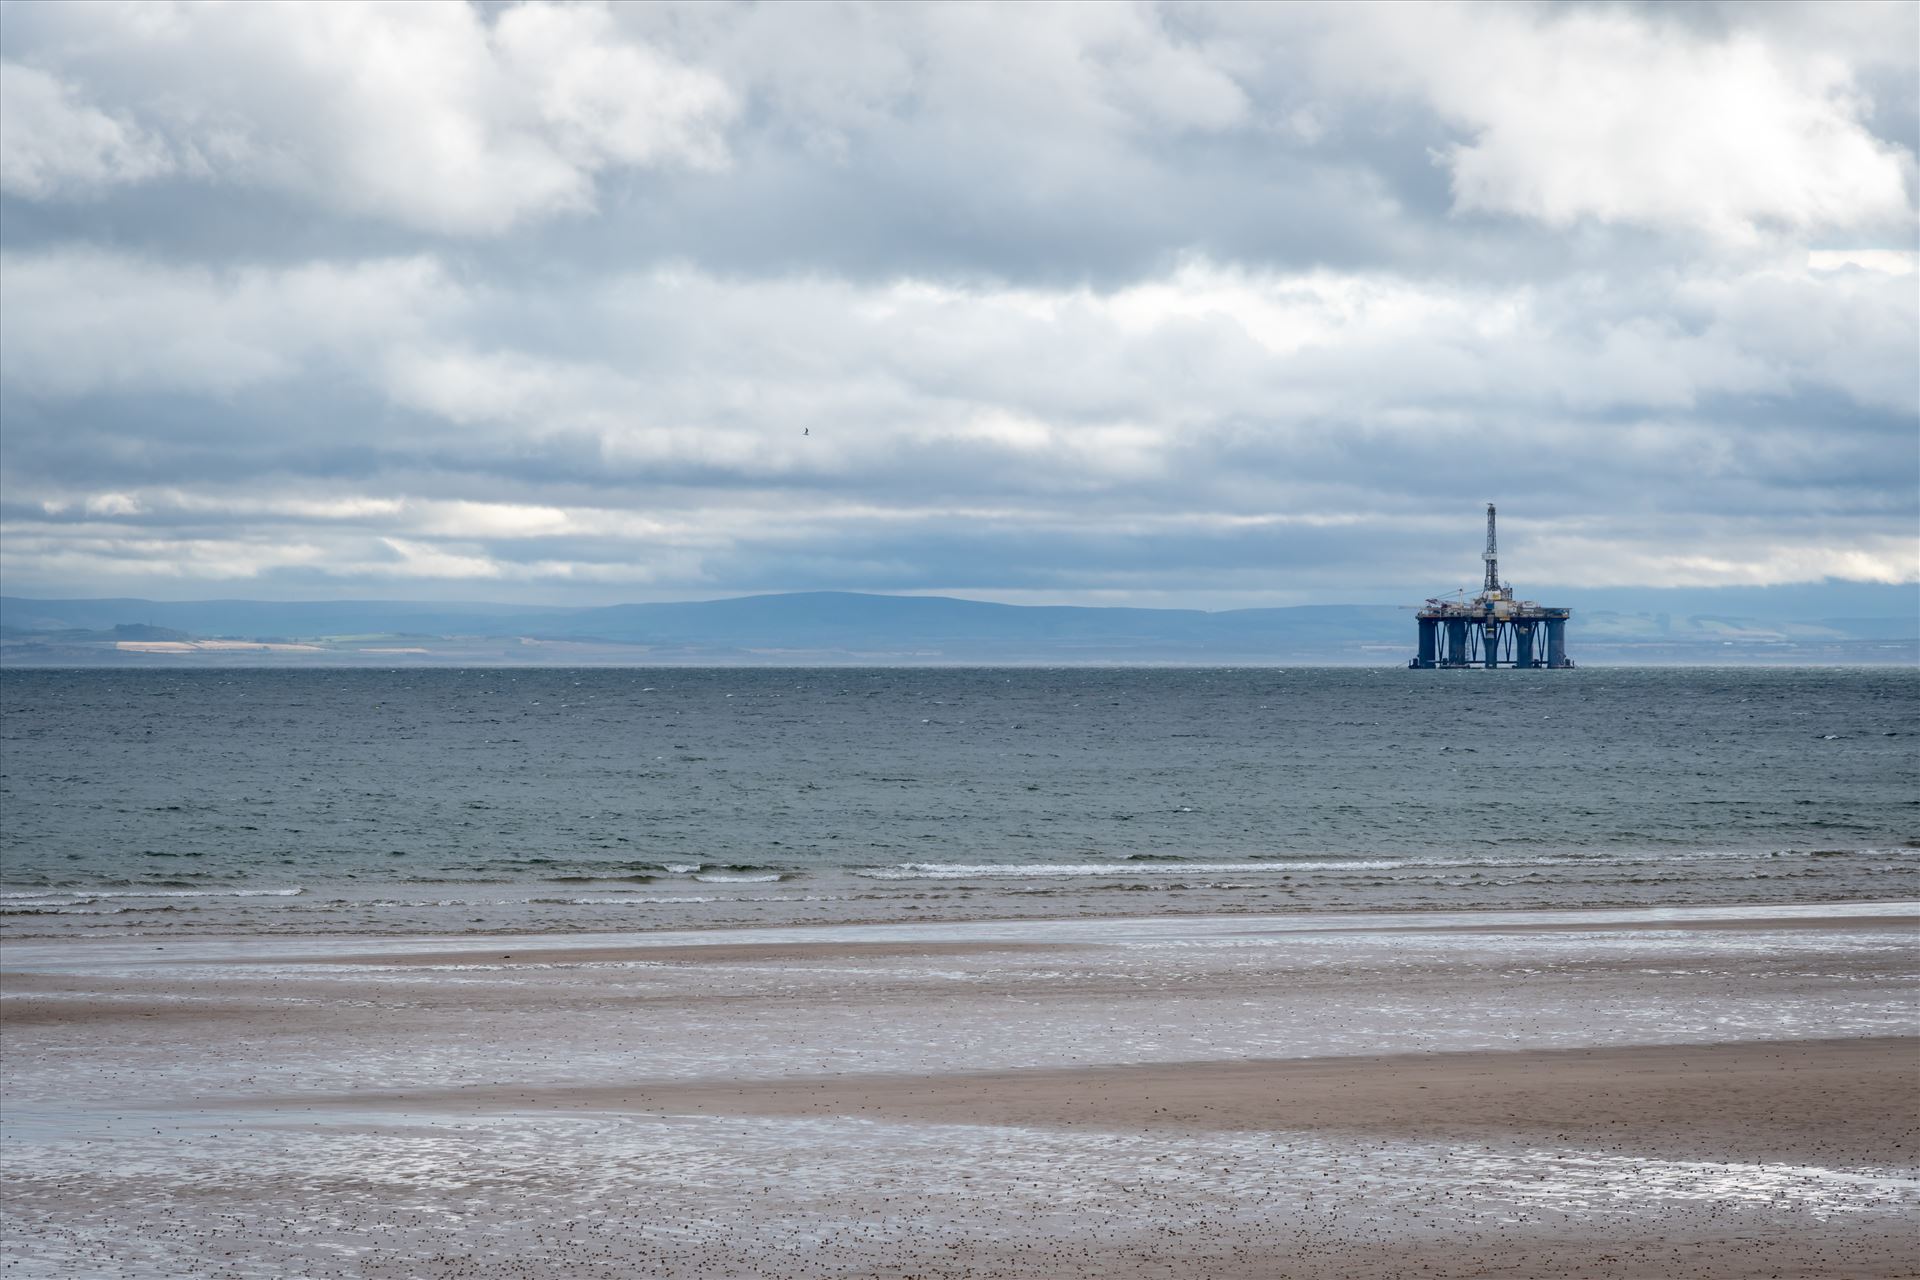 Oil Drilling rig, off Leven Bay, Scotland  by Graham Dobson Photography